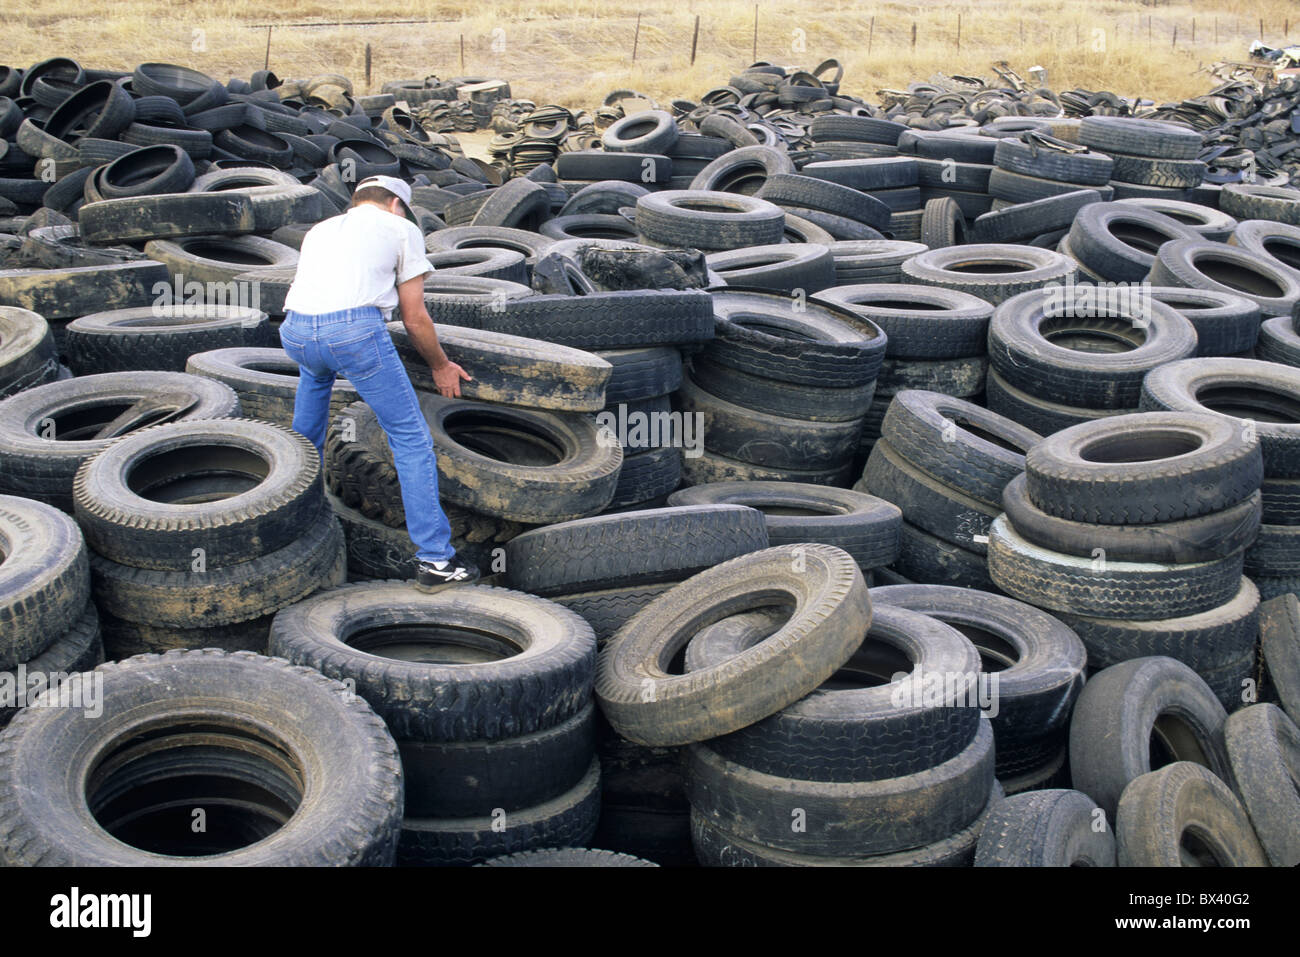 Worker piling discarded old tires for recycling, United States Stock Photo